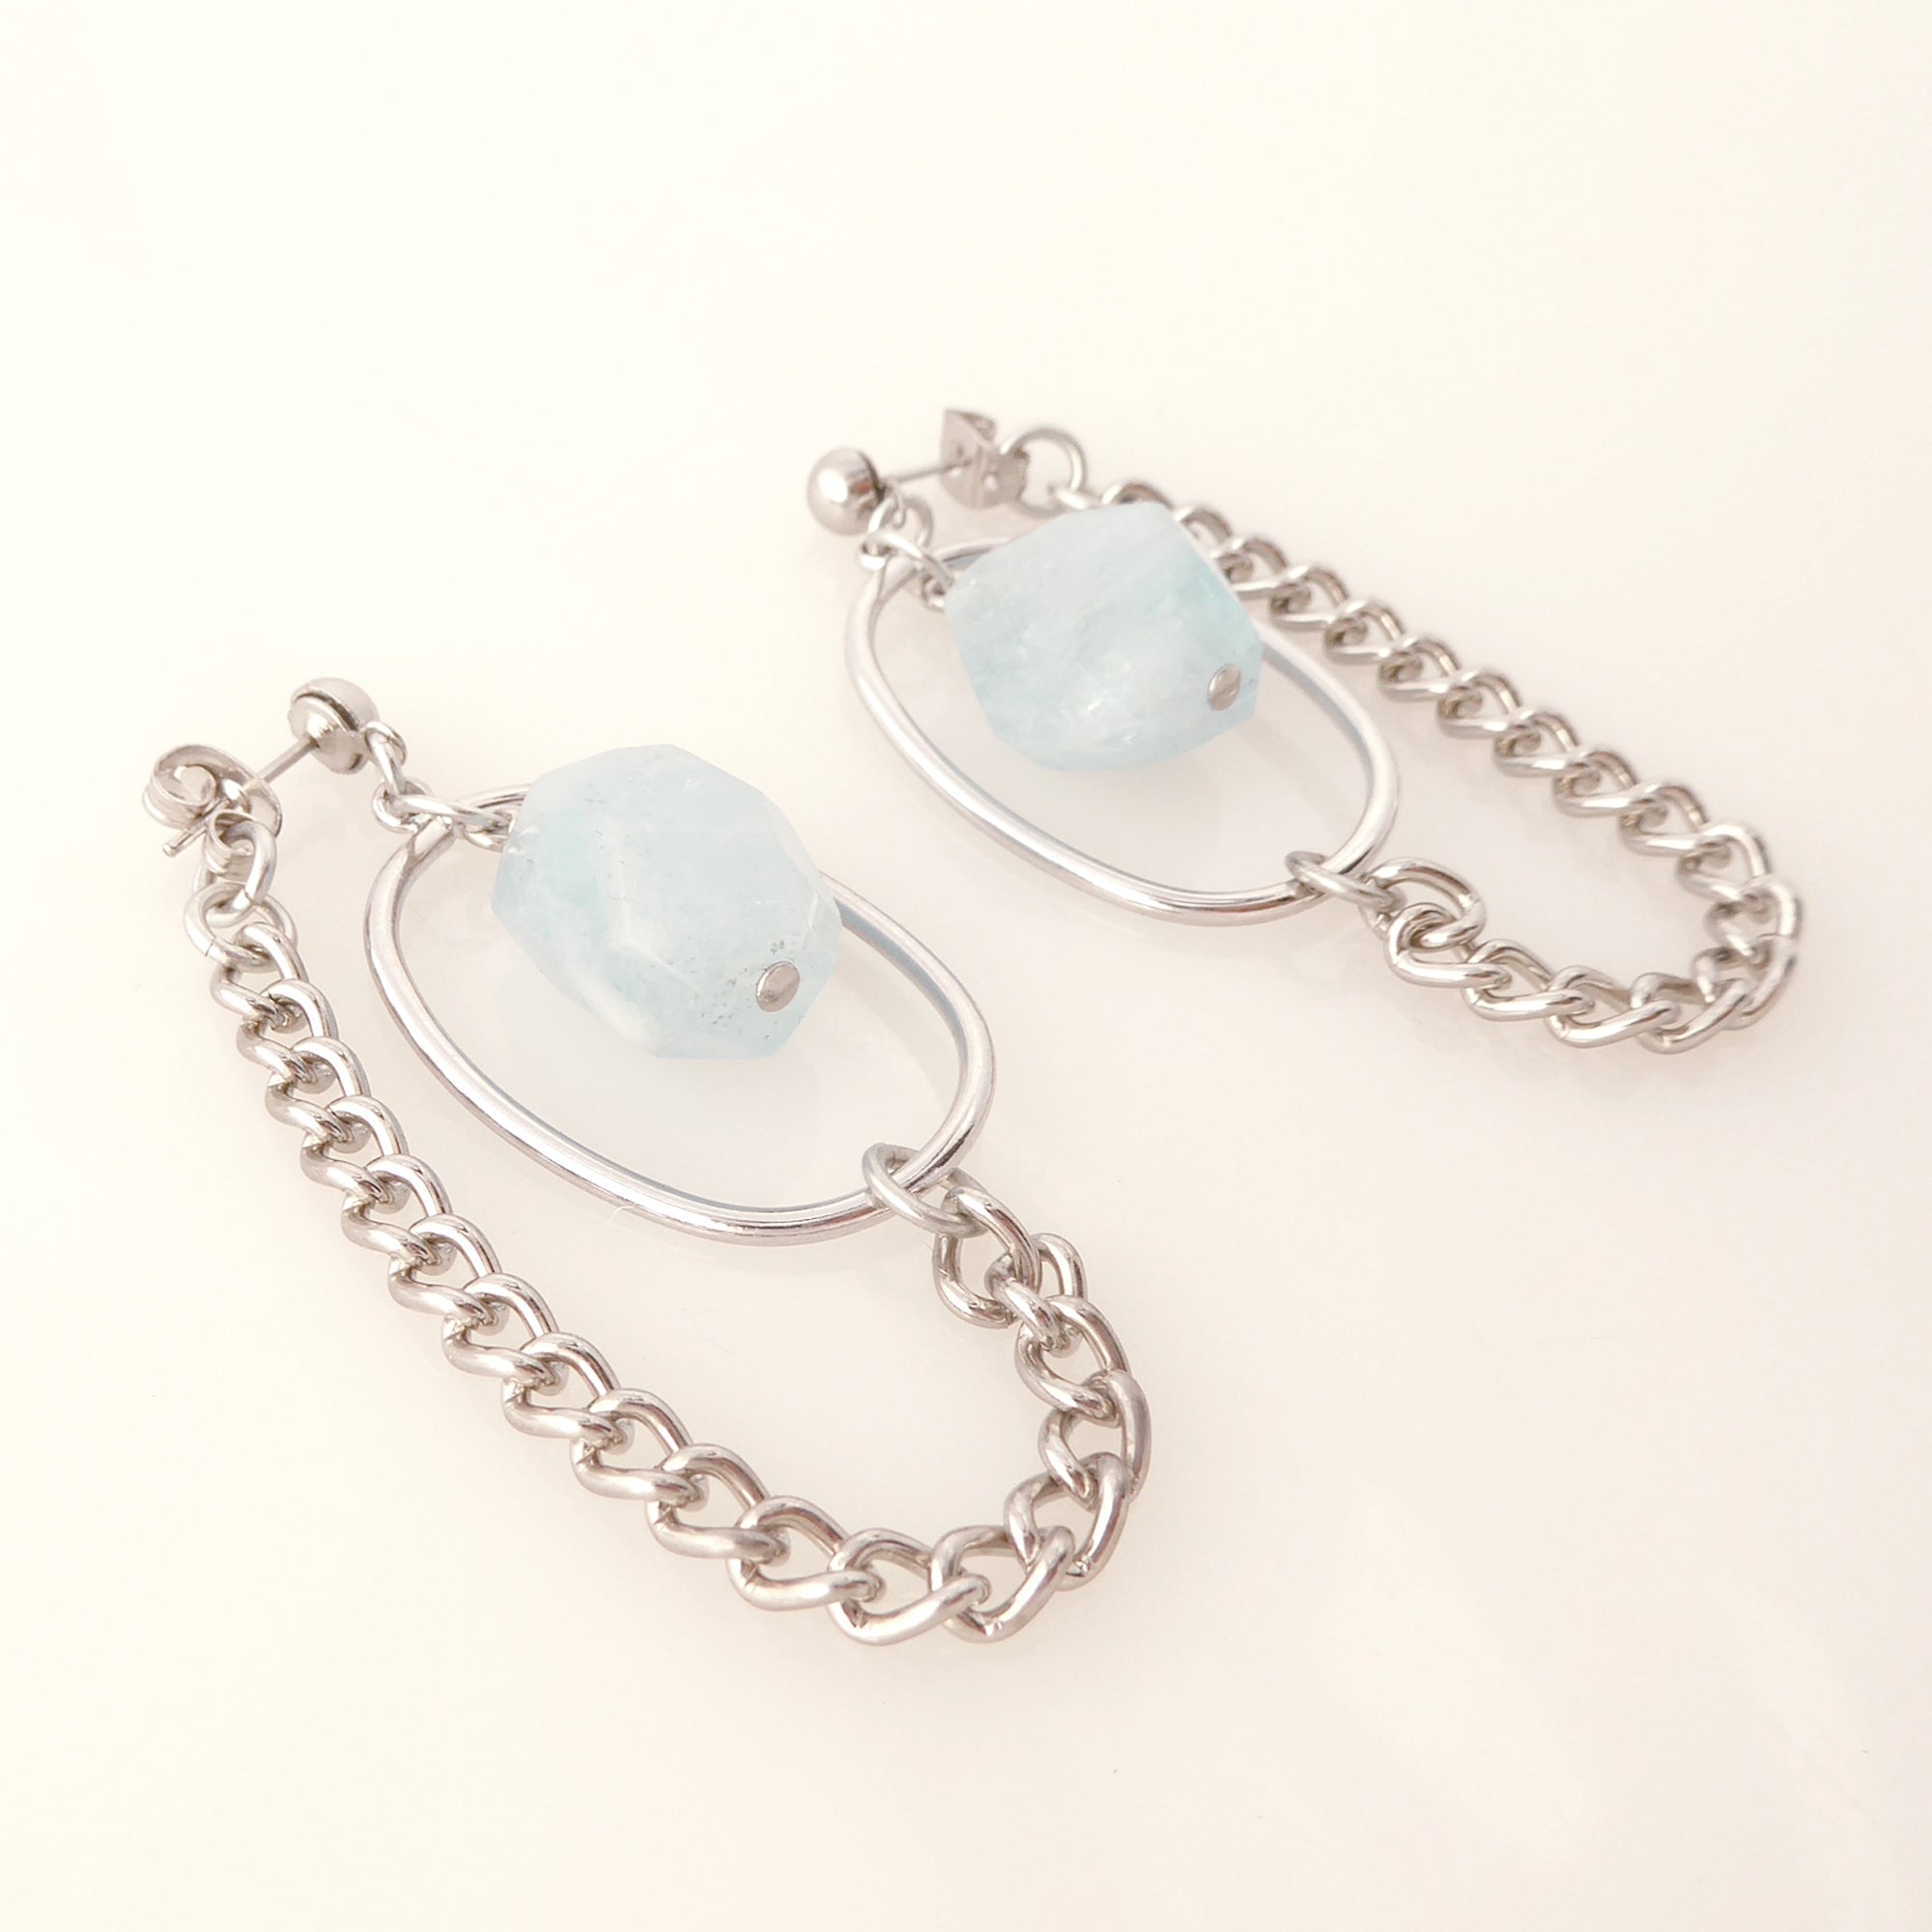 Silver saturn earrings in aquamarine by Jenny Dayco 2